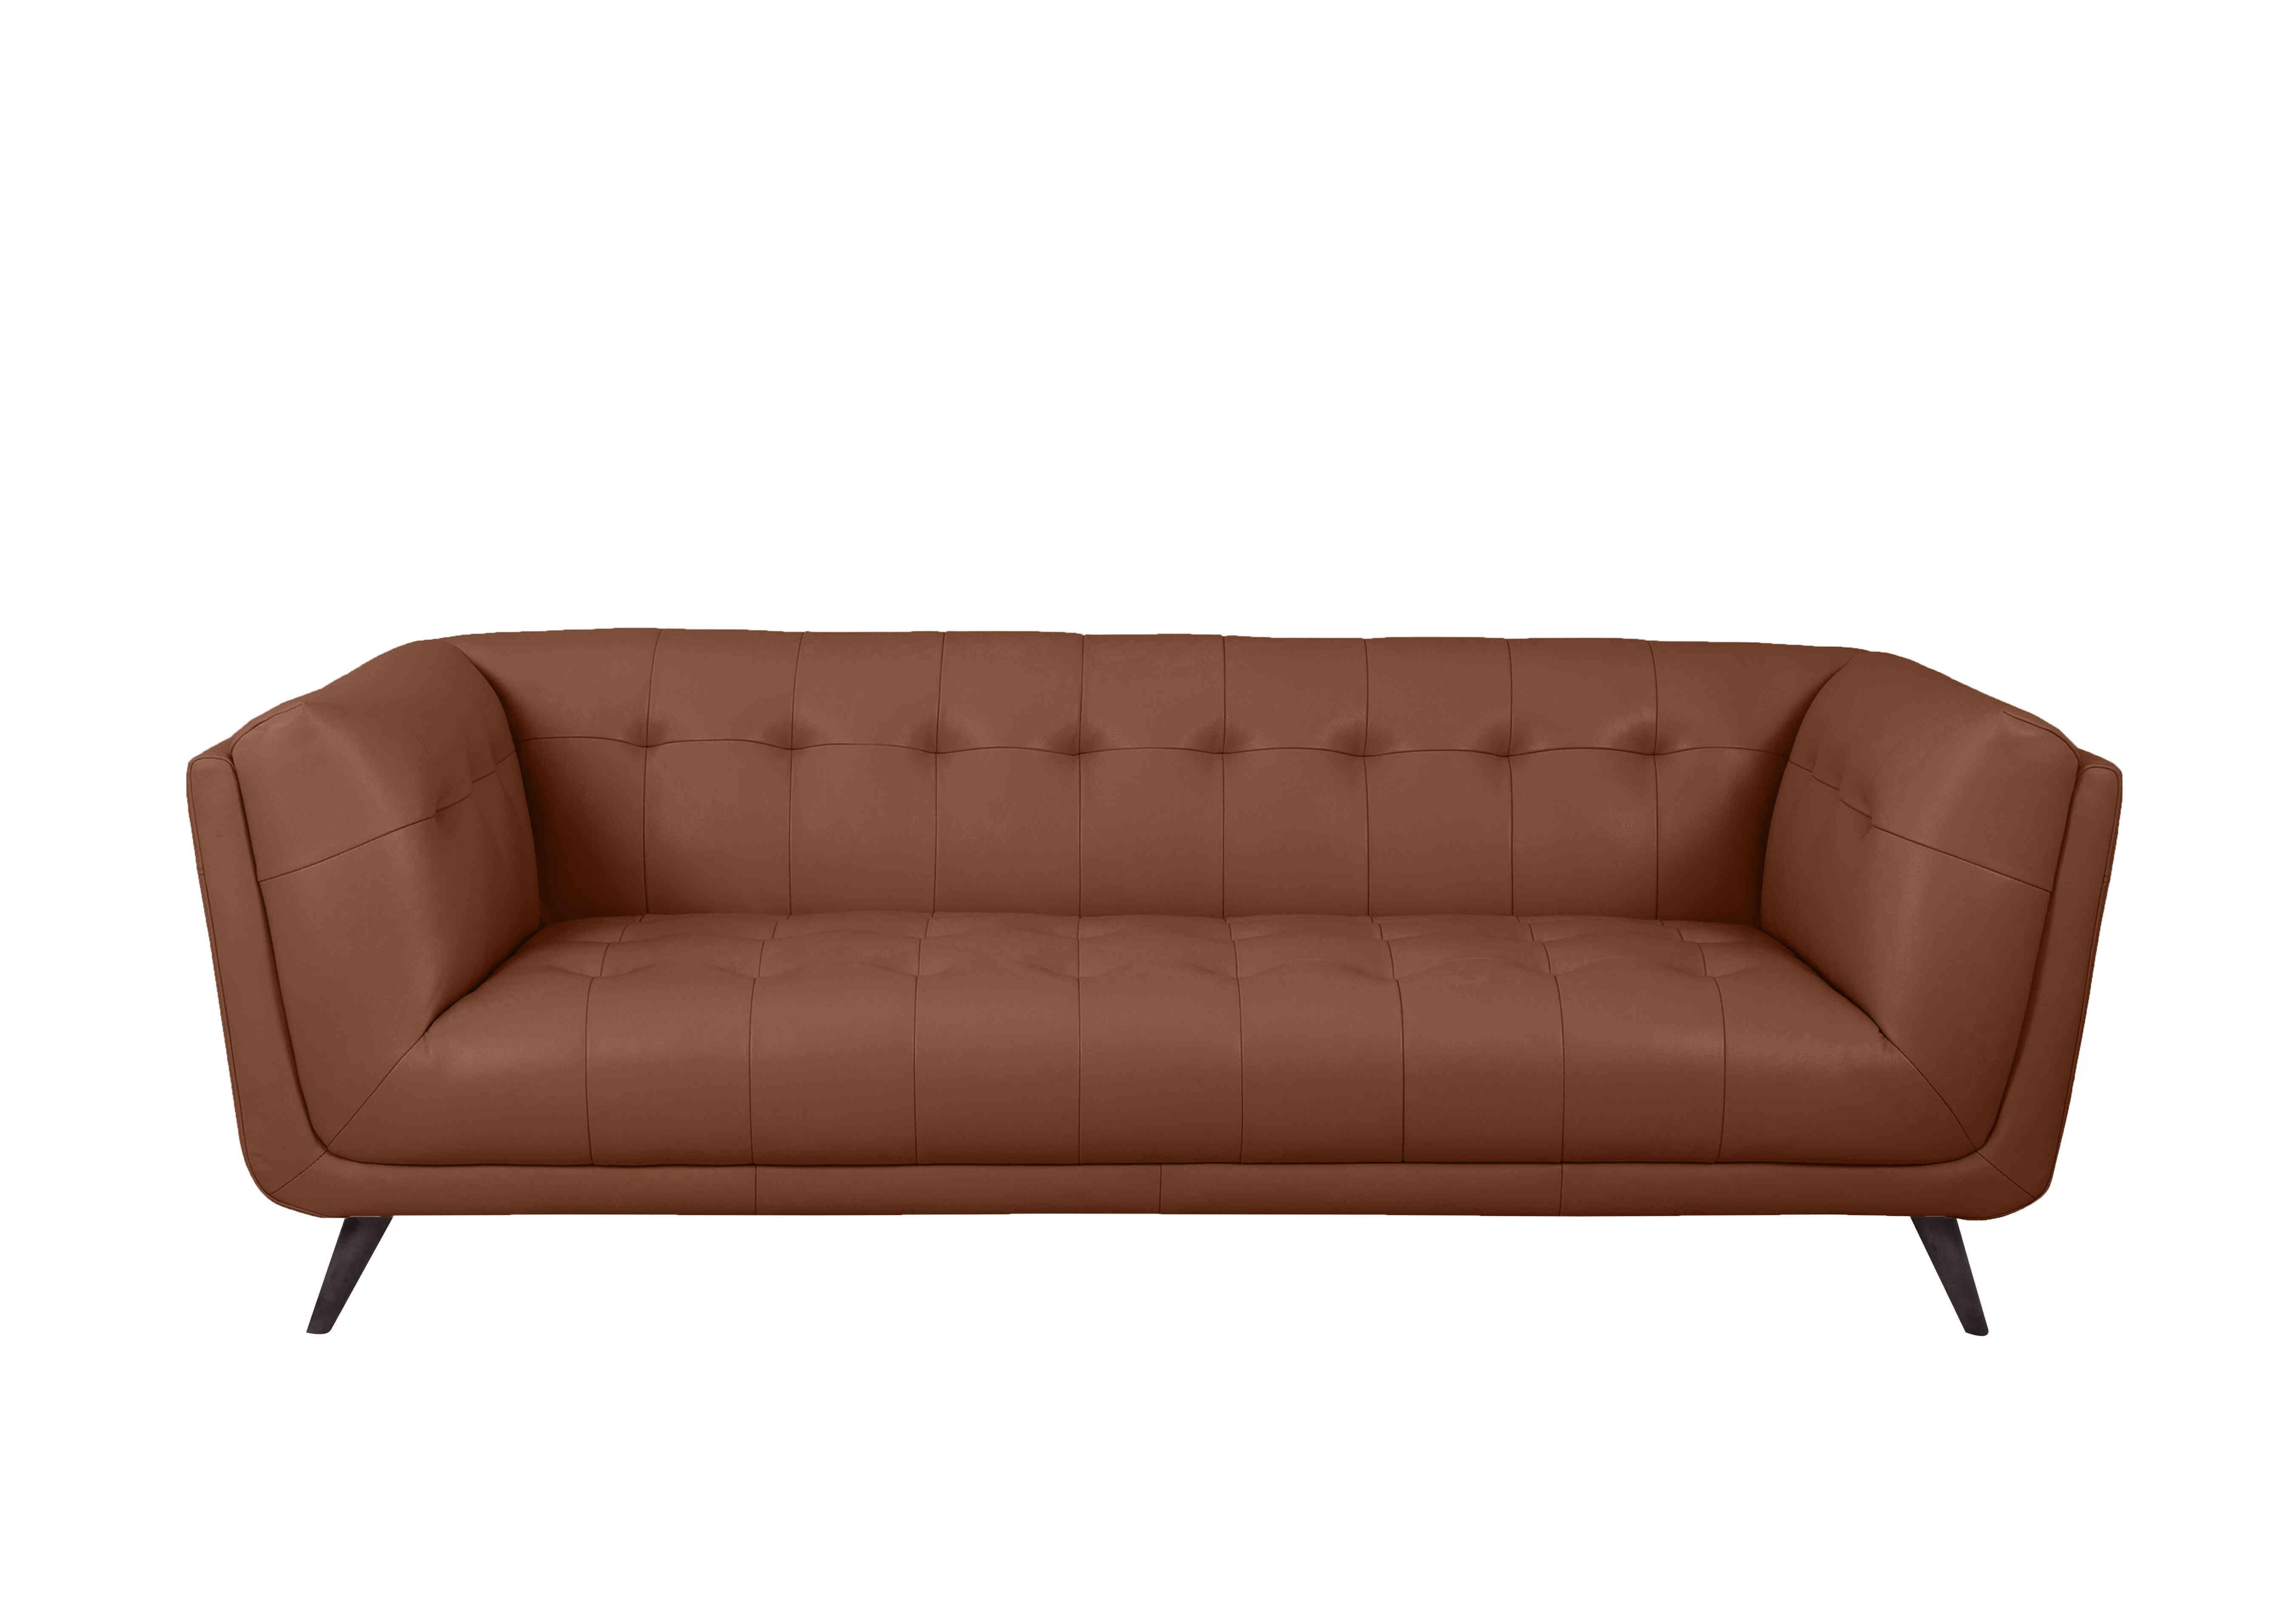 Rene 3 Seater Leather Sofa in Florida Butterscotch on Furniture Village